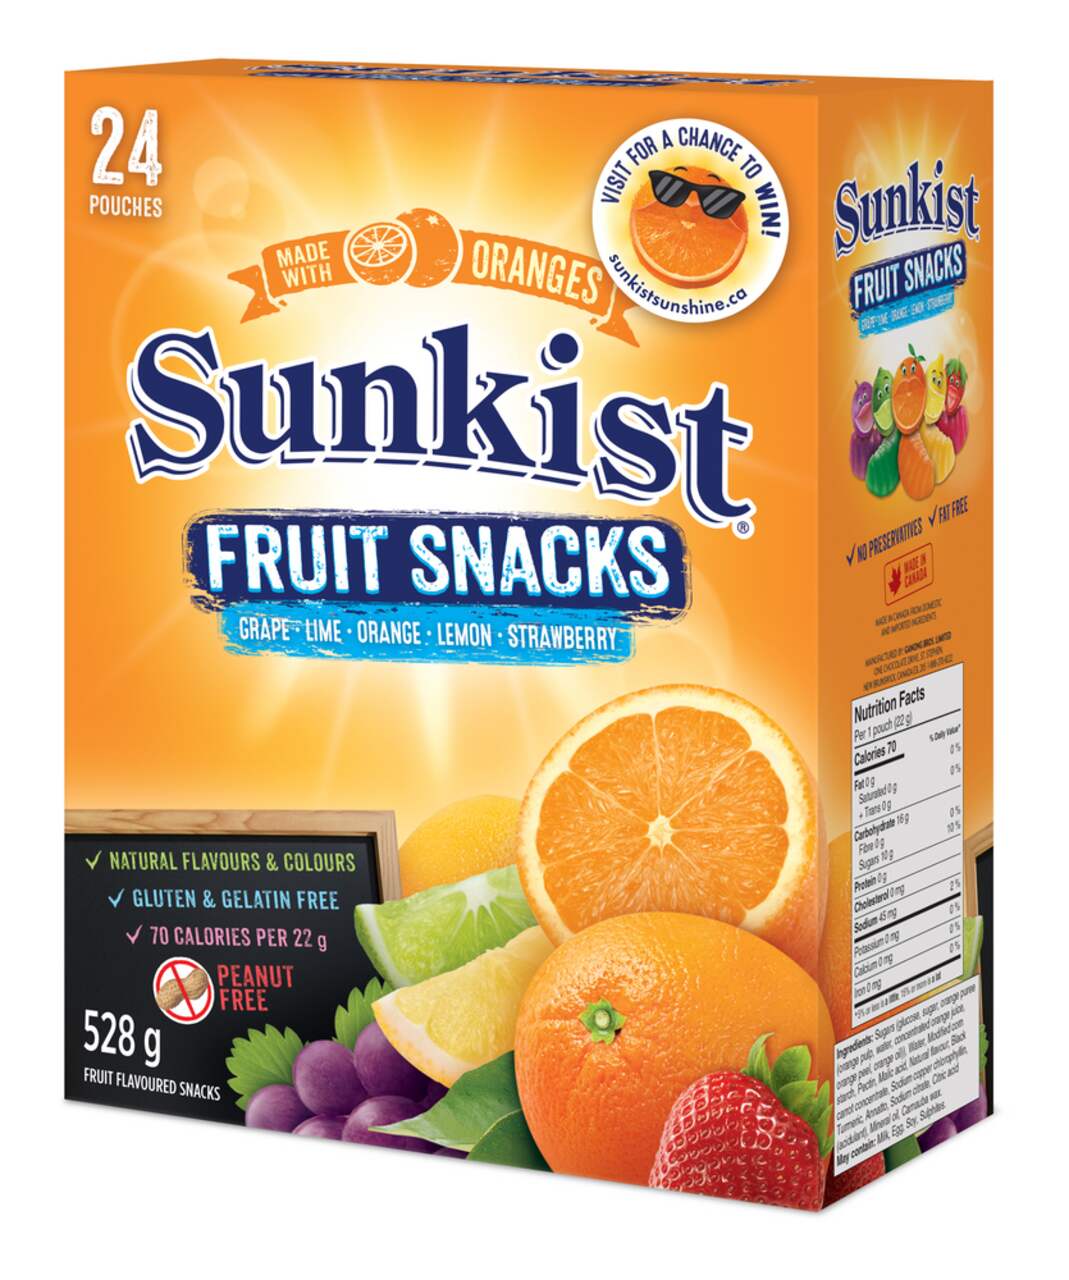 https://media-www.canadiantire.ca/product/living/food-drink/seasonal-confectionery/1532571/sunkist-fruit-snack-24-count-03fe127b-b9ee-4244-b271-ce5ebf9cc9d4.png?imdensity=1&imwidth=640&impolicy=mZoom